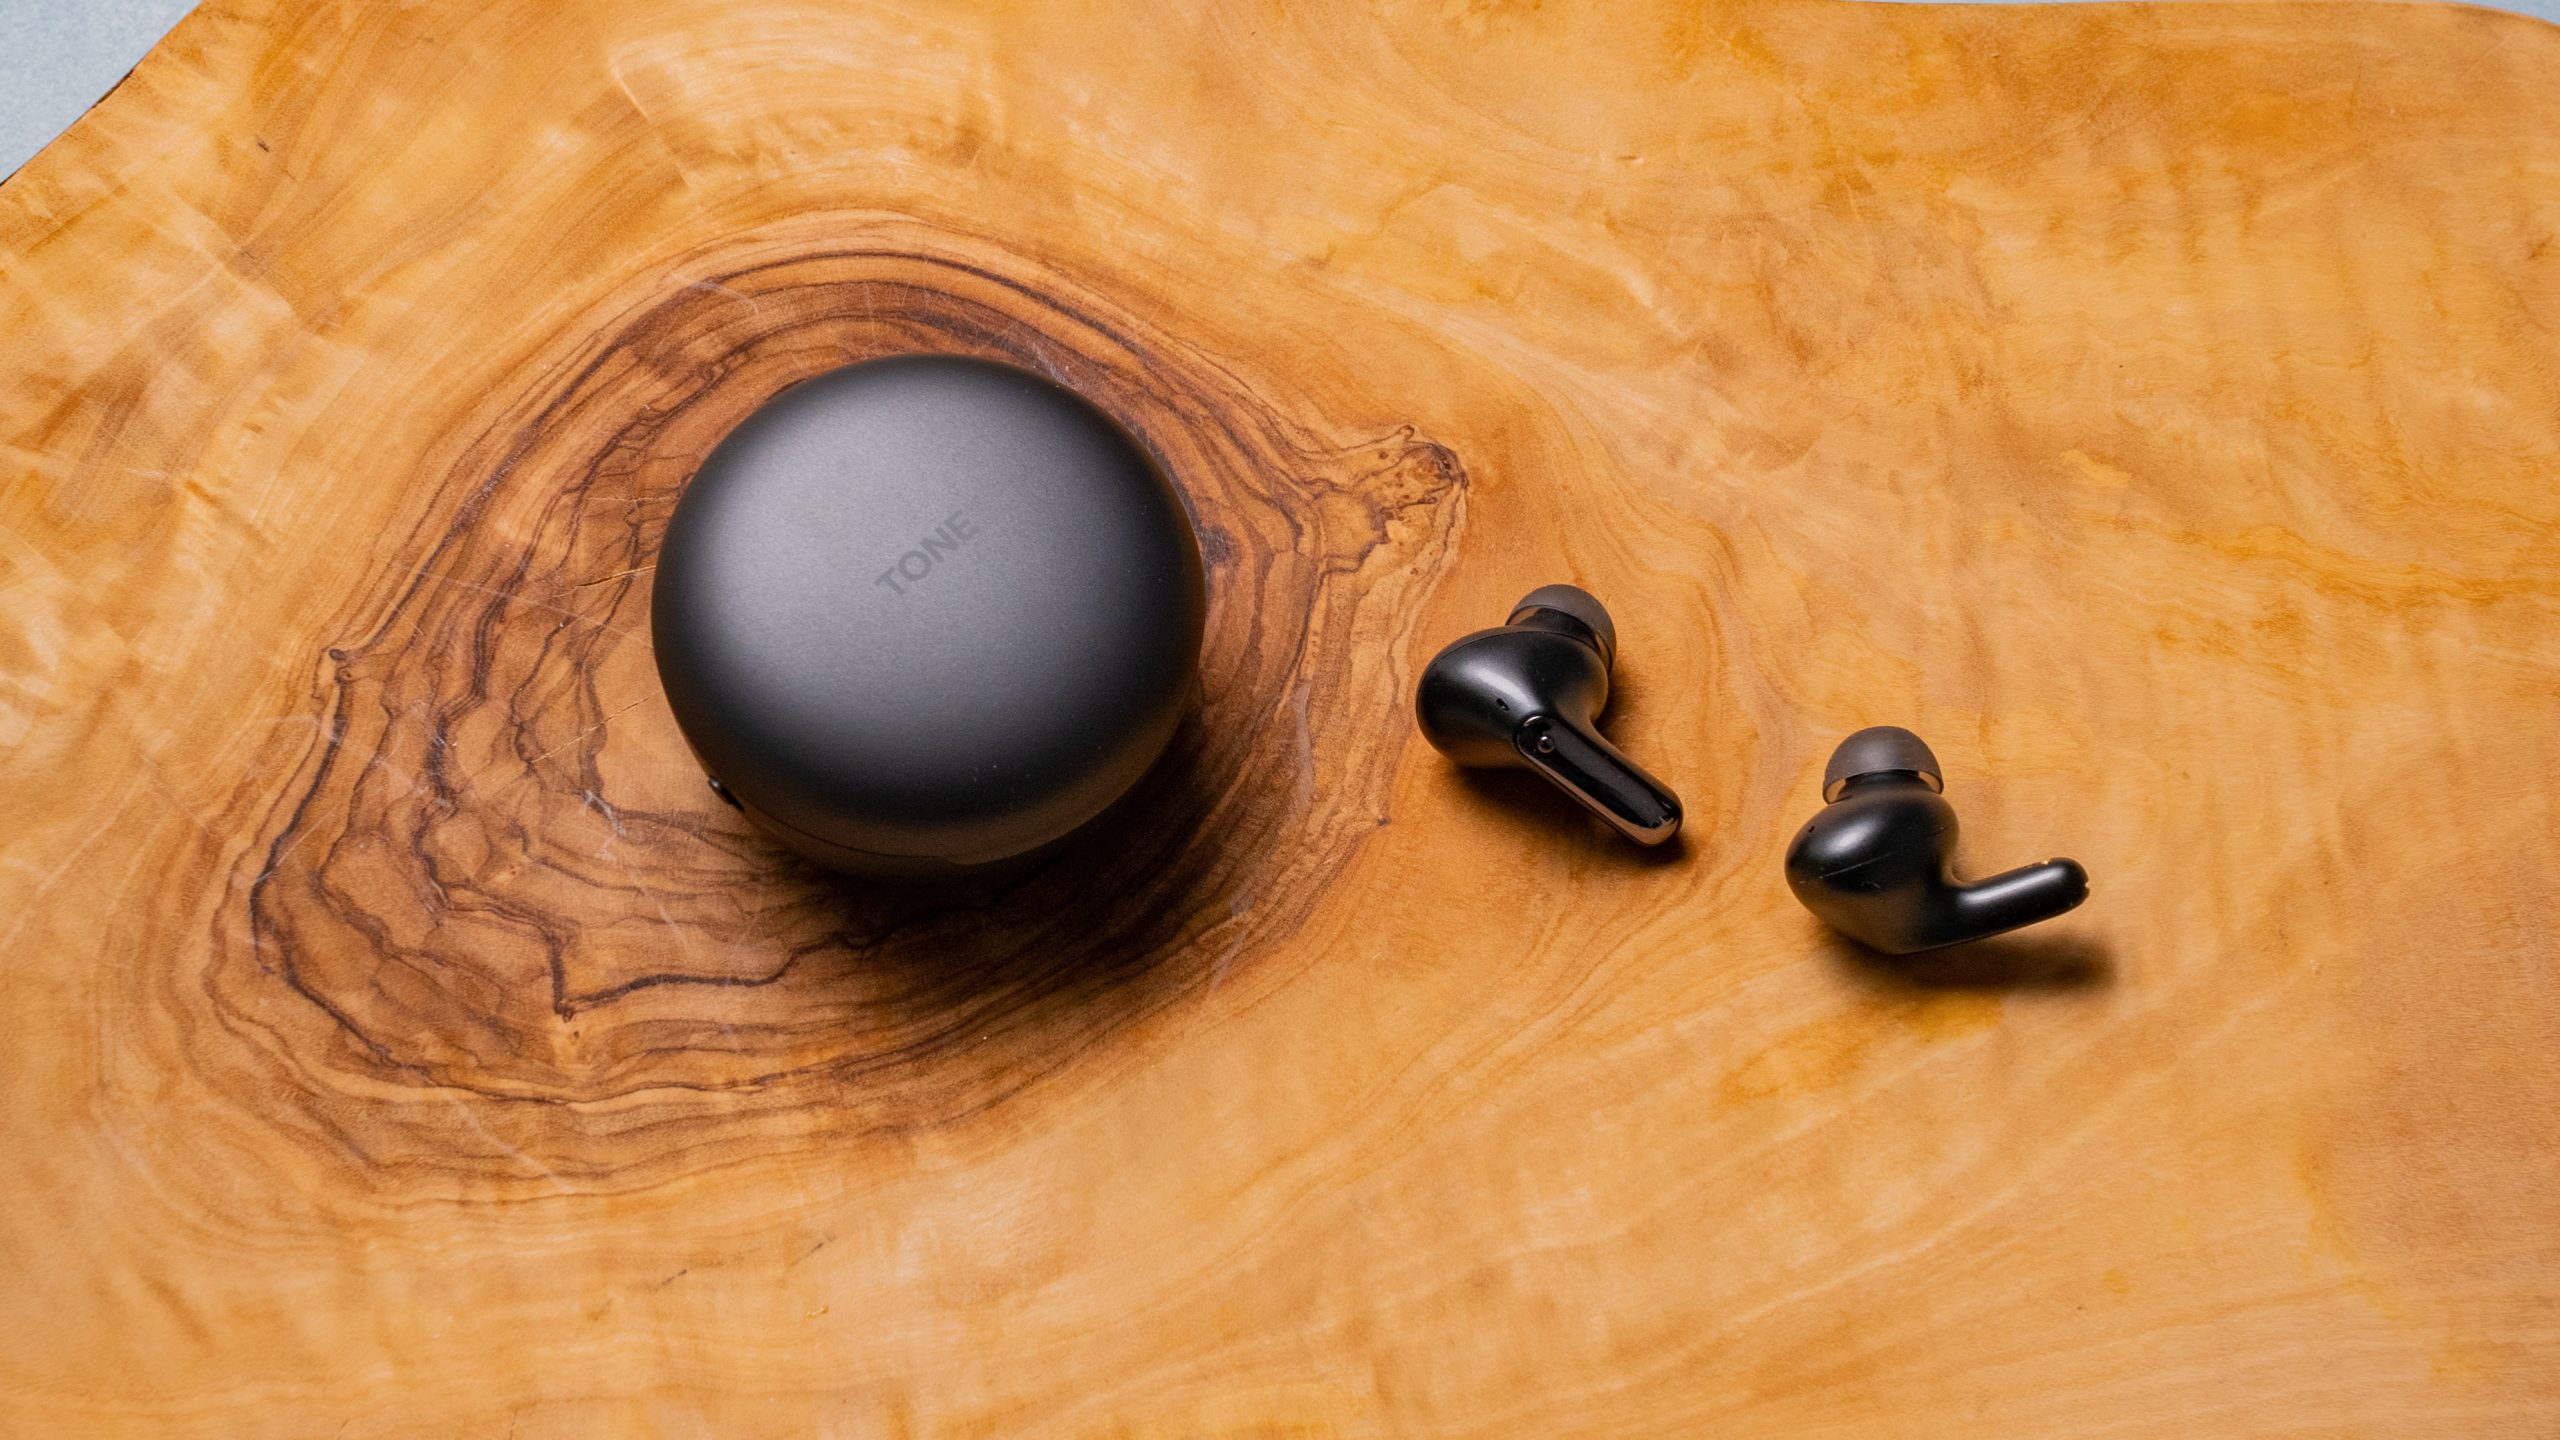 The LG Tone Free FP9 are solid in-ears, if a bit pricy with features you may not need.